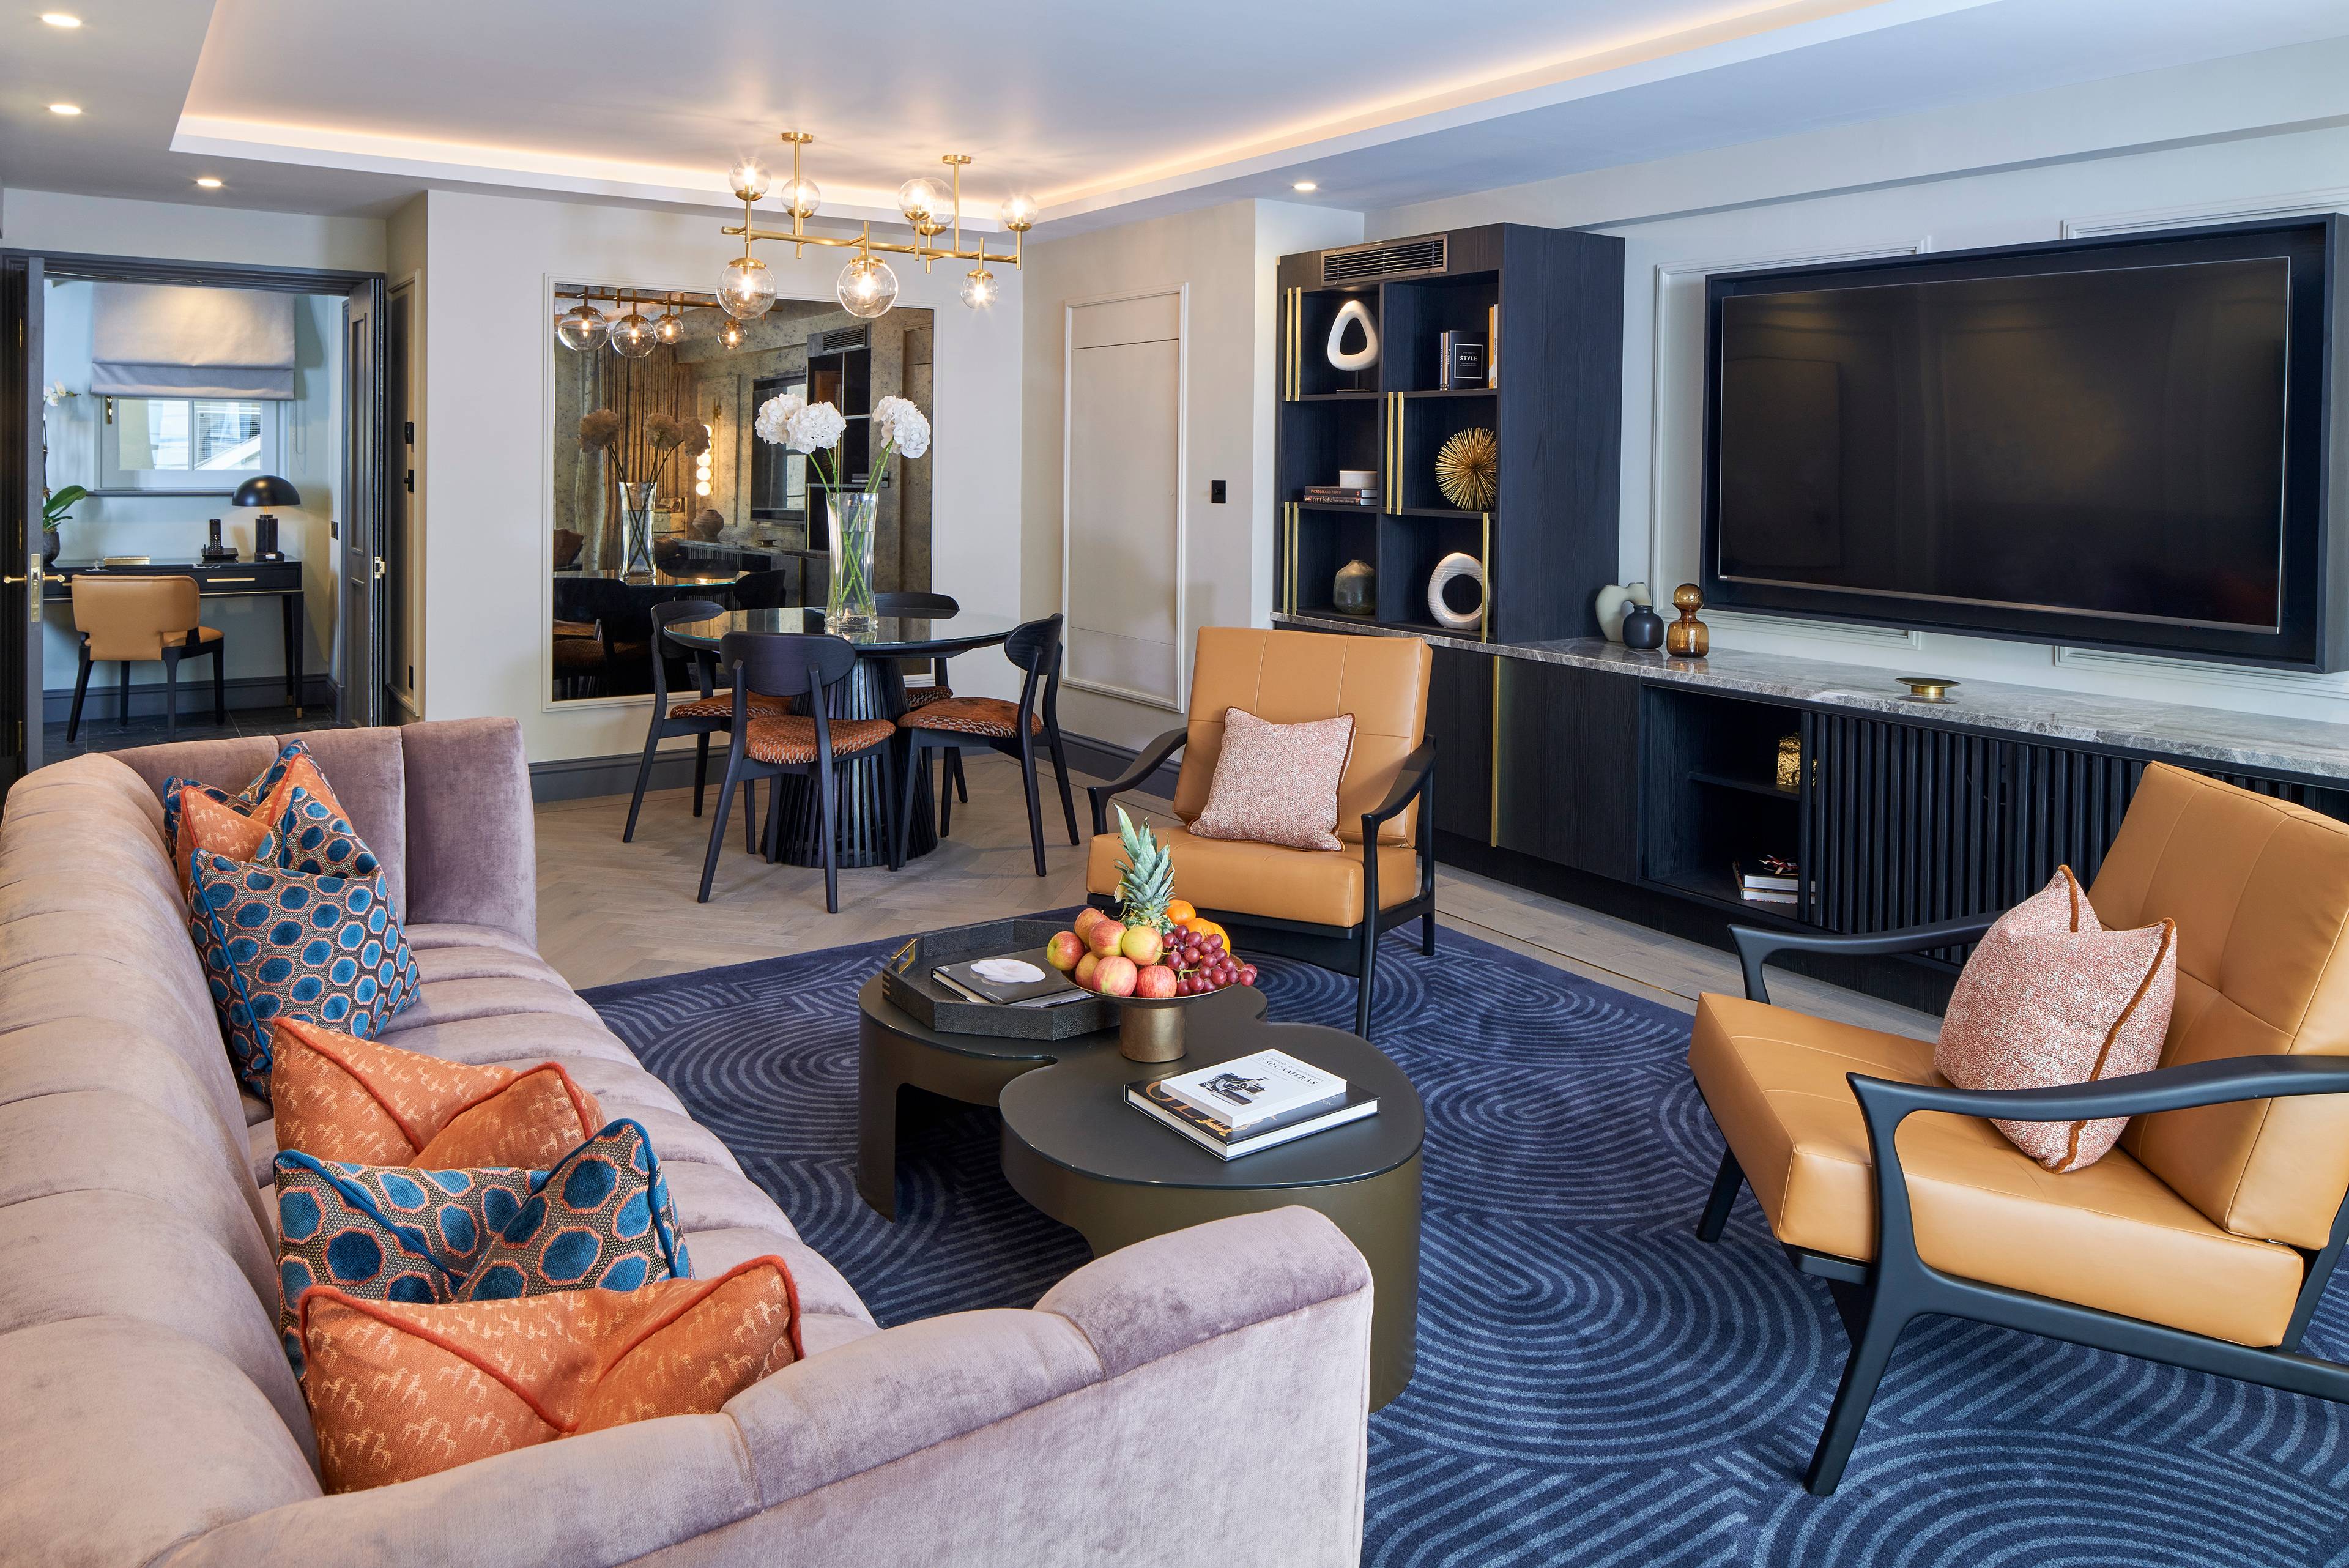 Newly Refurbished Deluxe First-Floor Two-Bedroom Apartment in a Palatial Kensington Residence with Spectacular Hyde Park Views and Luxury Amenities